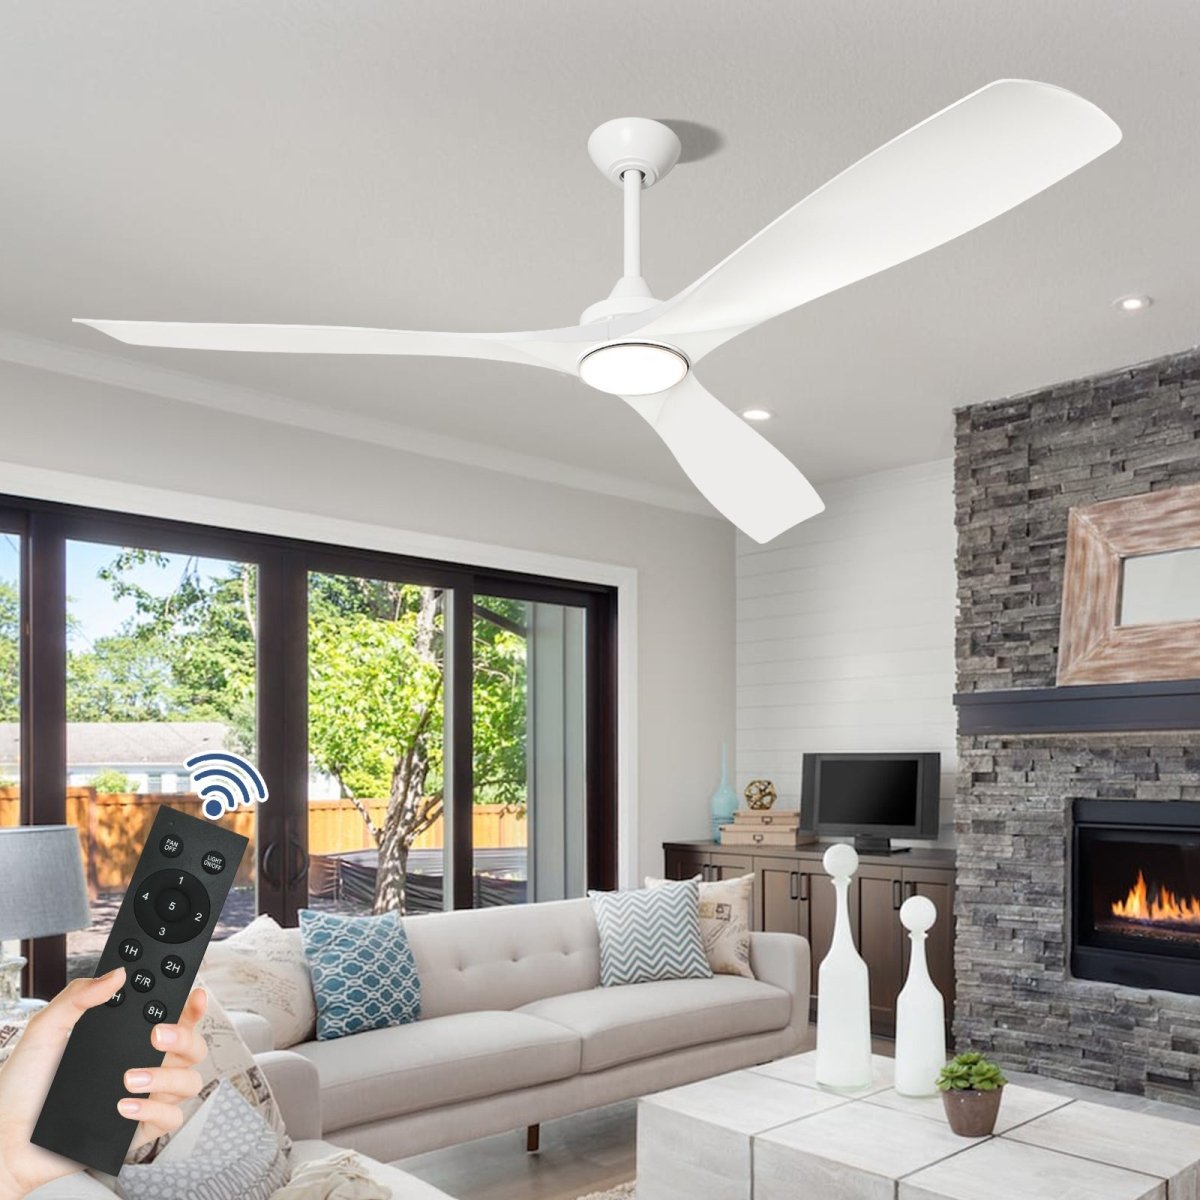 Depuley 60" Modern Ceiling Fan with Lights and Remote, Large Ceiling Fans Noiseless Reversible DC Motor for Patios/Living Room/Study/Gazebo Lighting, Timing, 3 Light Color Changeable-White - WS-FPZ41-18C-WH 1 | DEPULEY